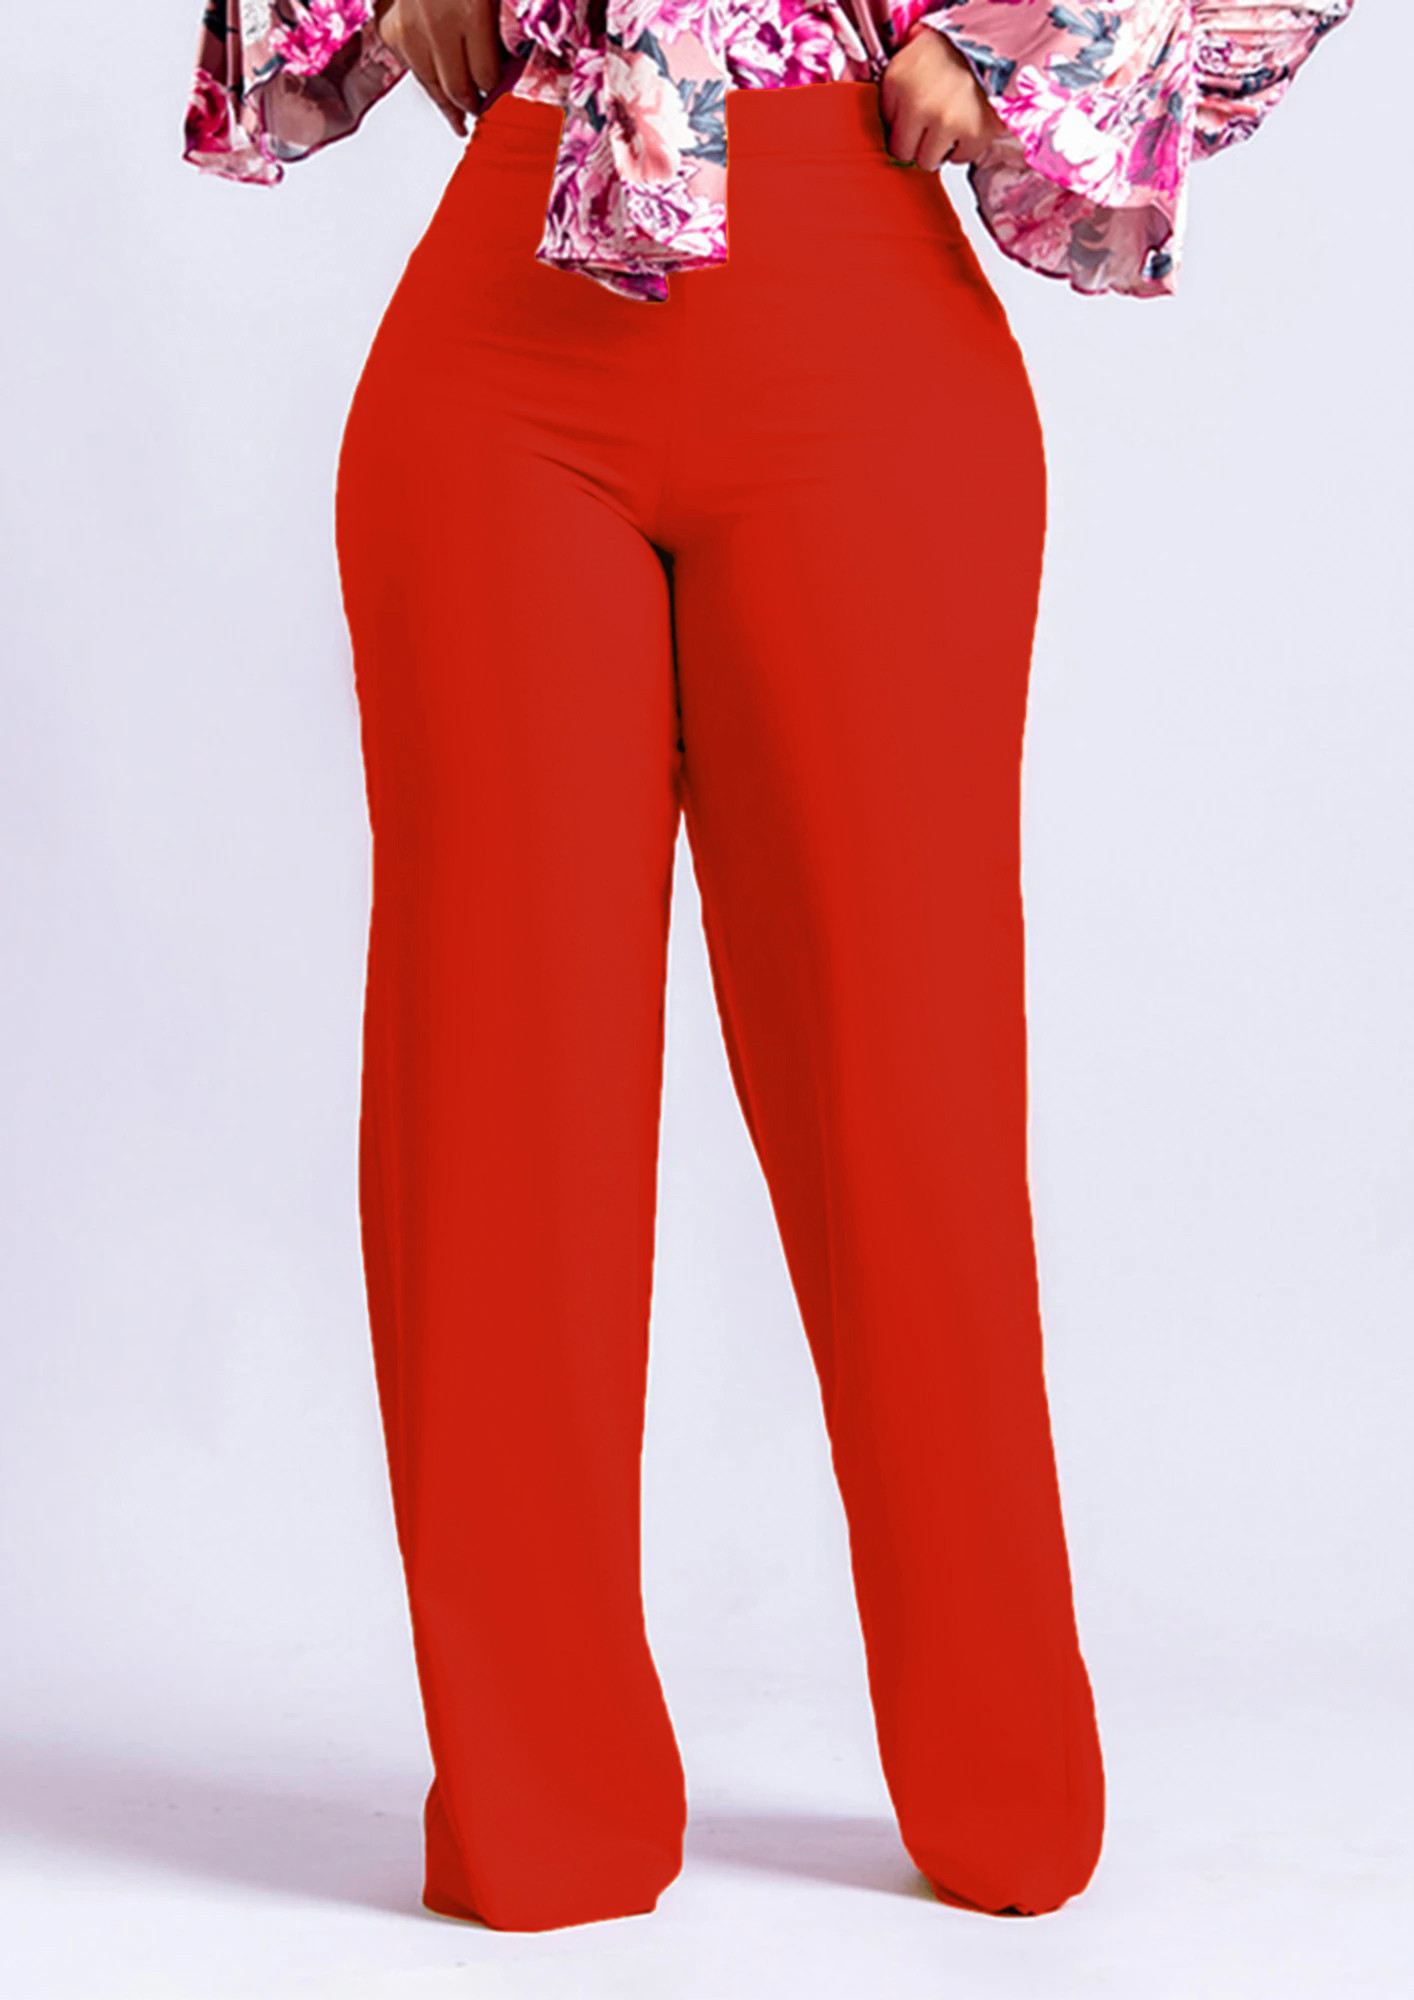 Missguided  High Waist Wide Leg Trousers Red  Outfit pantalon rojo Moda  rojo Combinar colores ropa